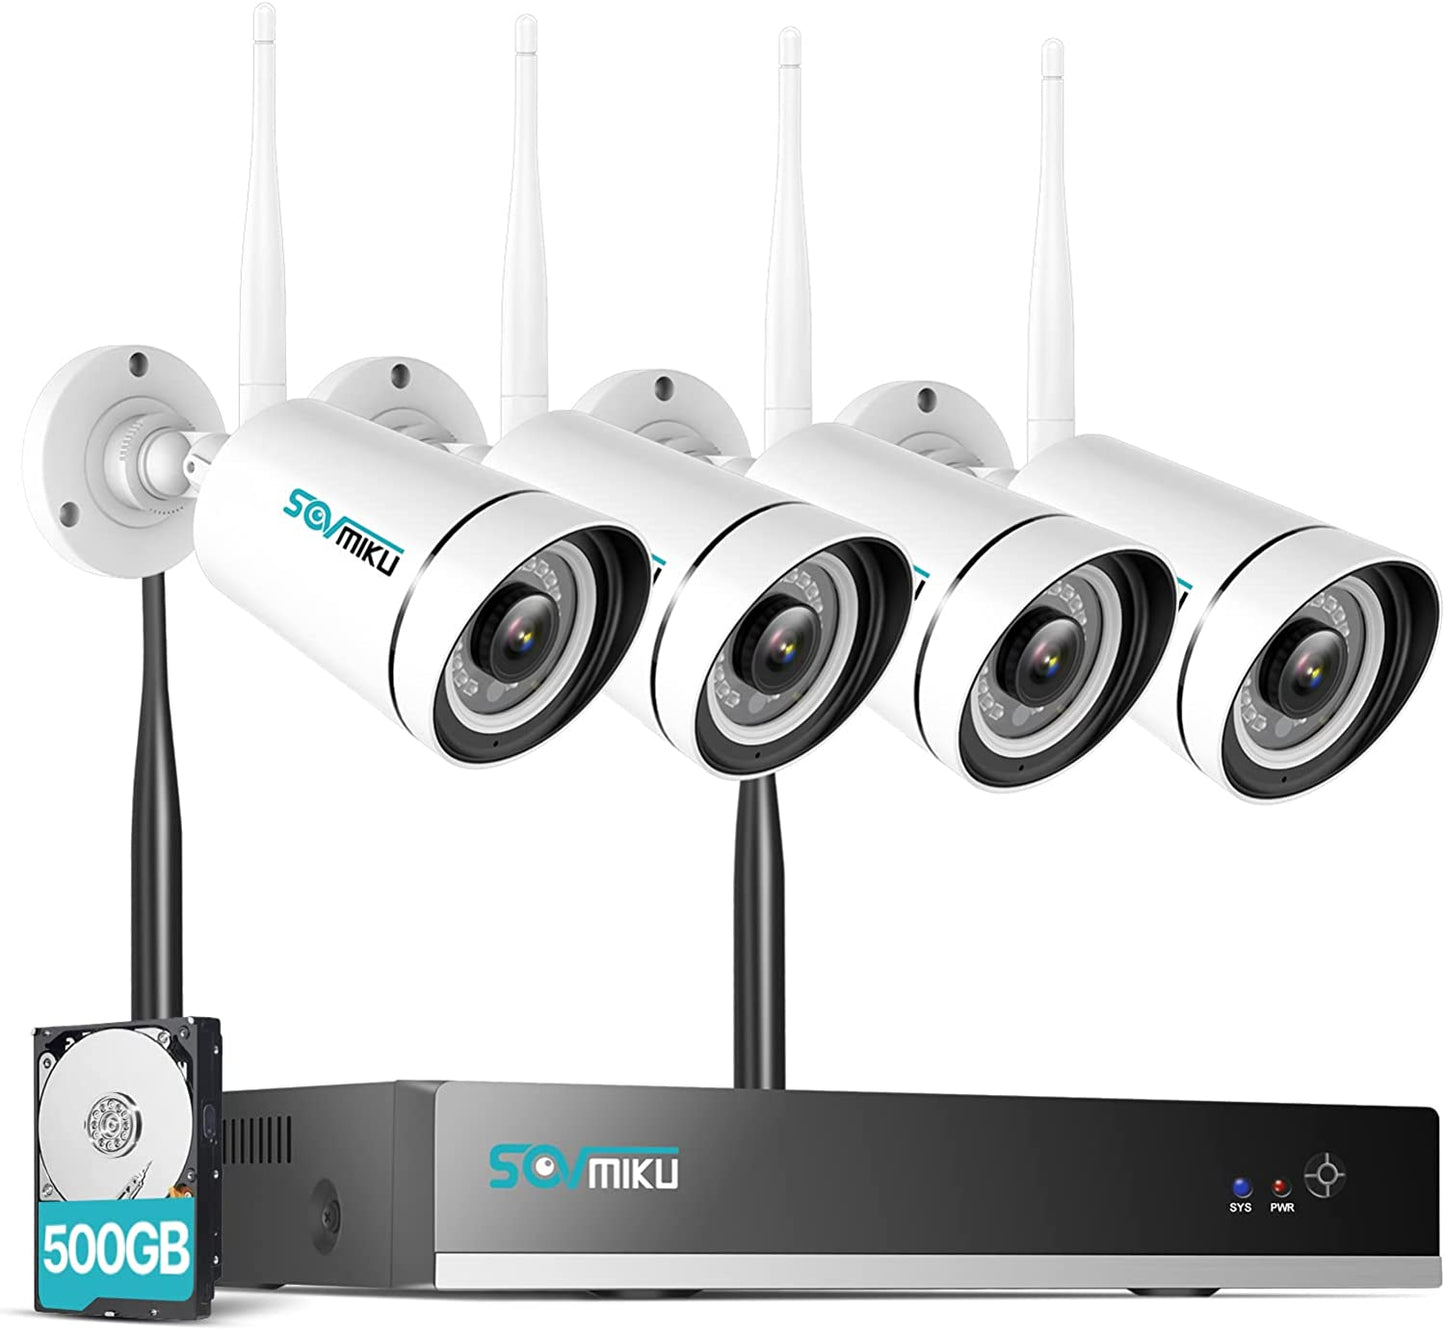 Wifi Security Camera System Face Detection 3MP Two Way Audio Security Cameras,8Channel NVR, Mobile&Pc Remote, IP66, Siren Alarm 7/24 Recording Night Vision with 500GB Hard Drive